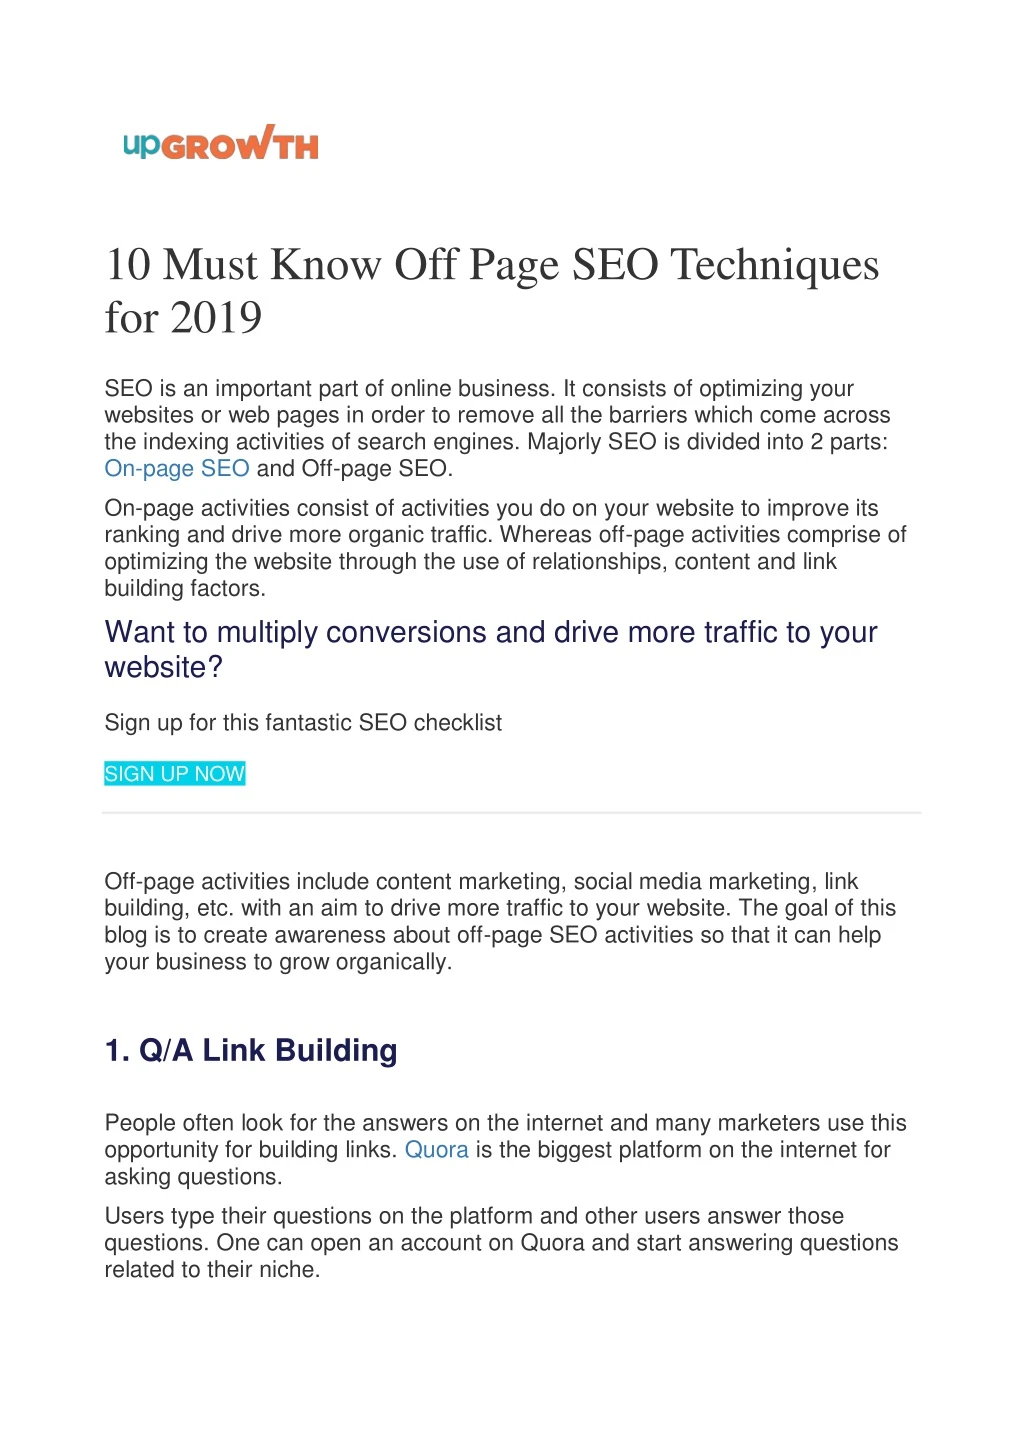 10 must know off page seo techniques for 2019